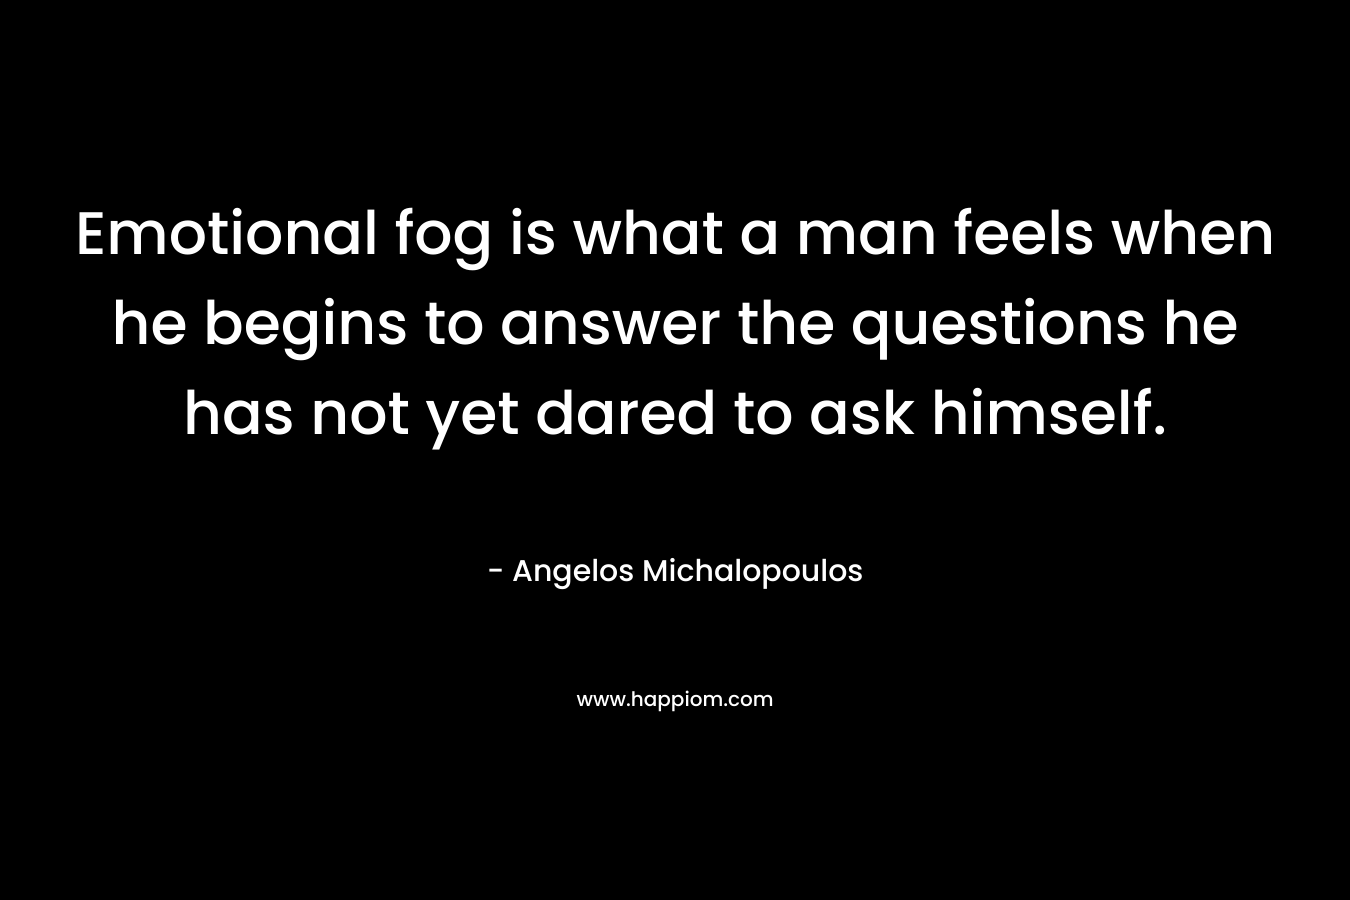 Emotional fog is what a man feels when he begins to answer the questions he has not yet dared to ask himself.